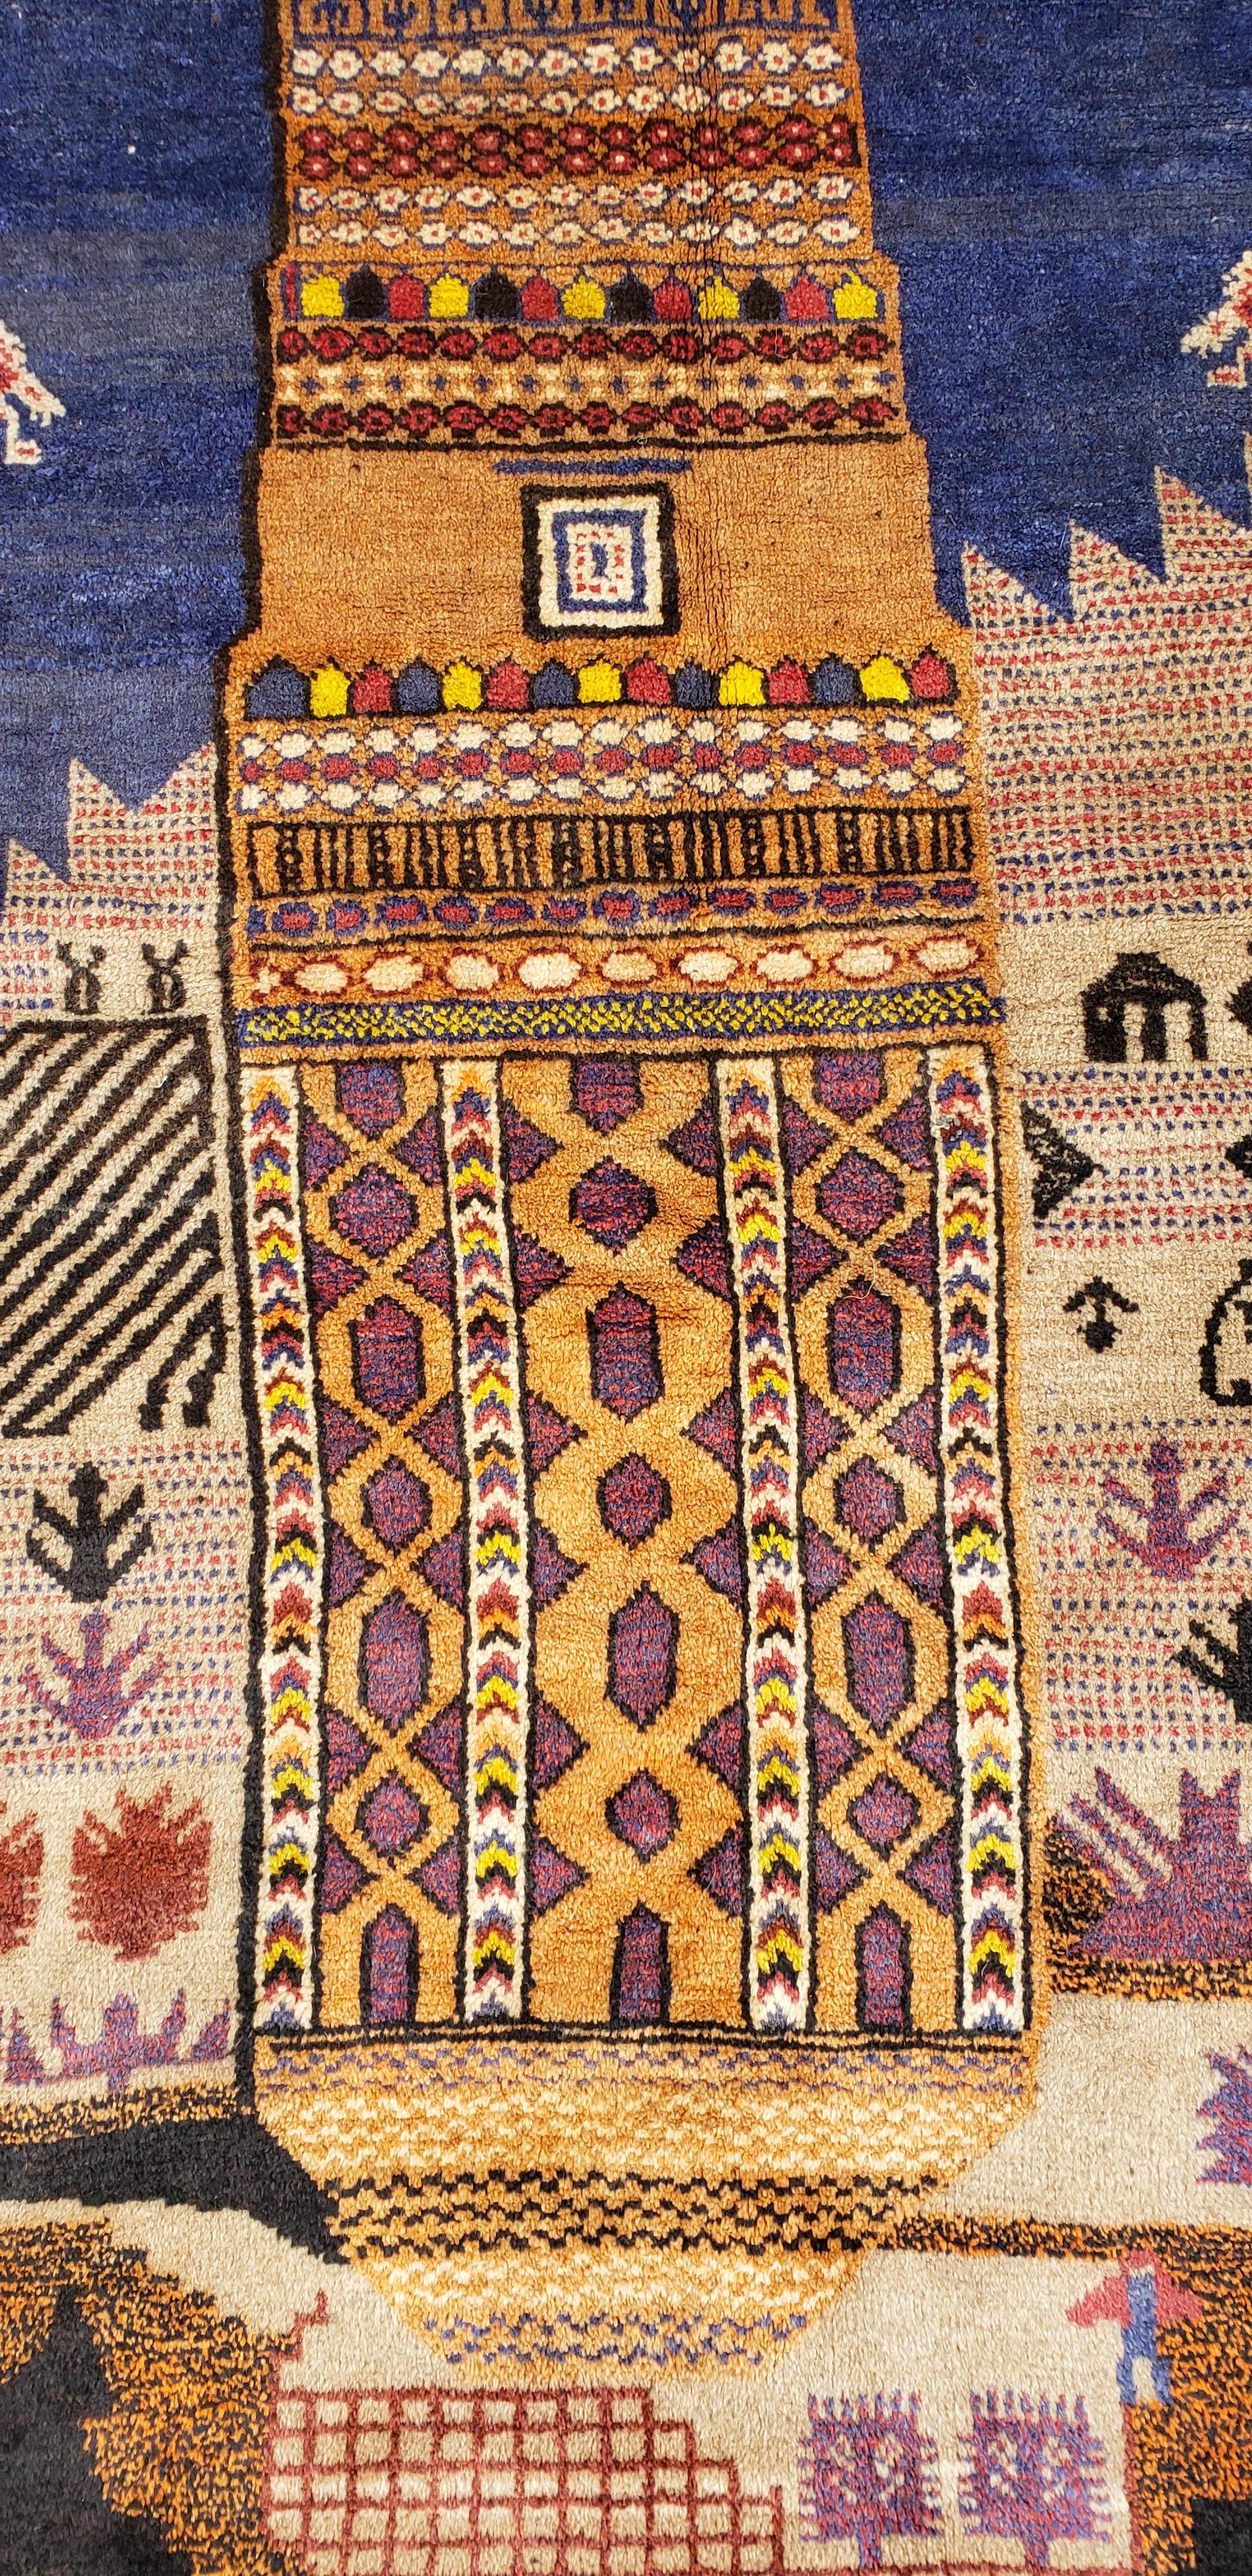 We carry some of the best Afghan carpets around, and if you like to give your home a colorful new look with one of our area rugs, we are here to help. This one measures approximately 65